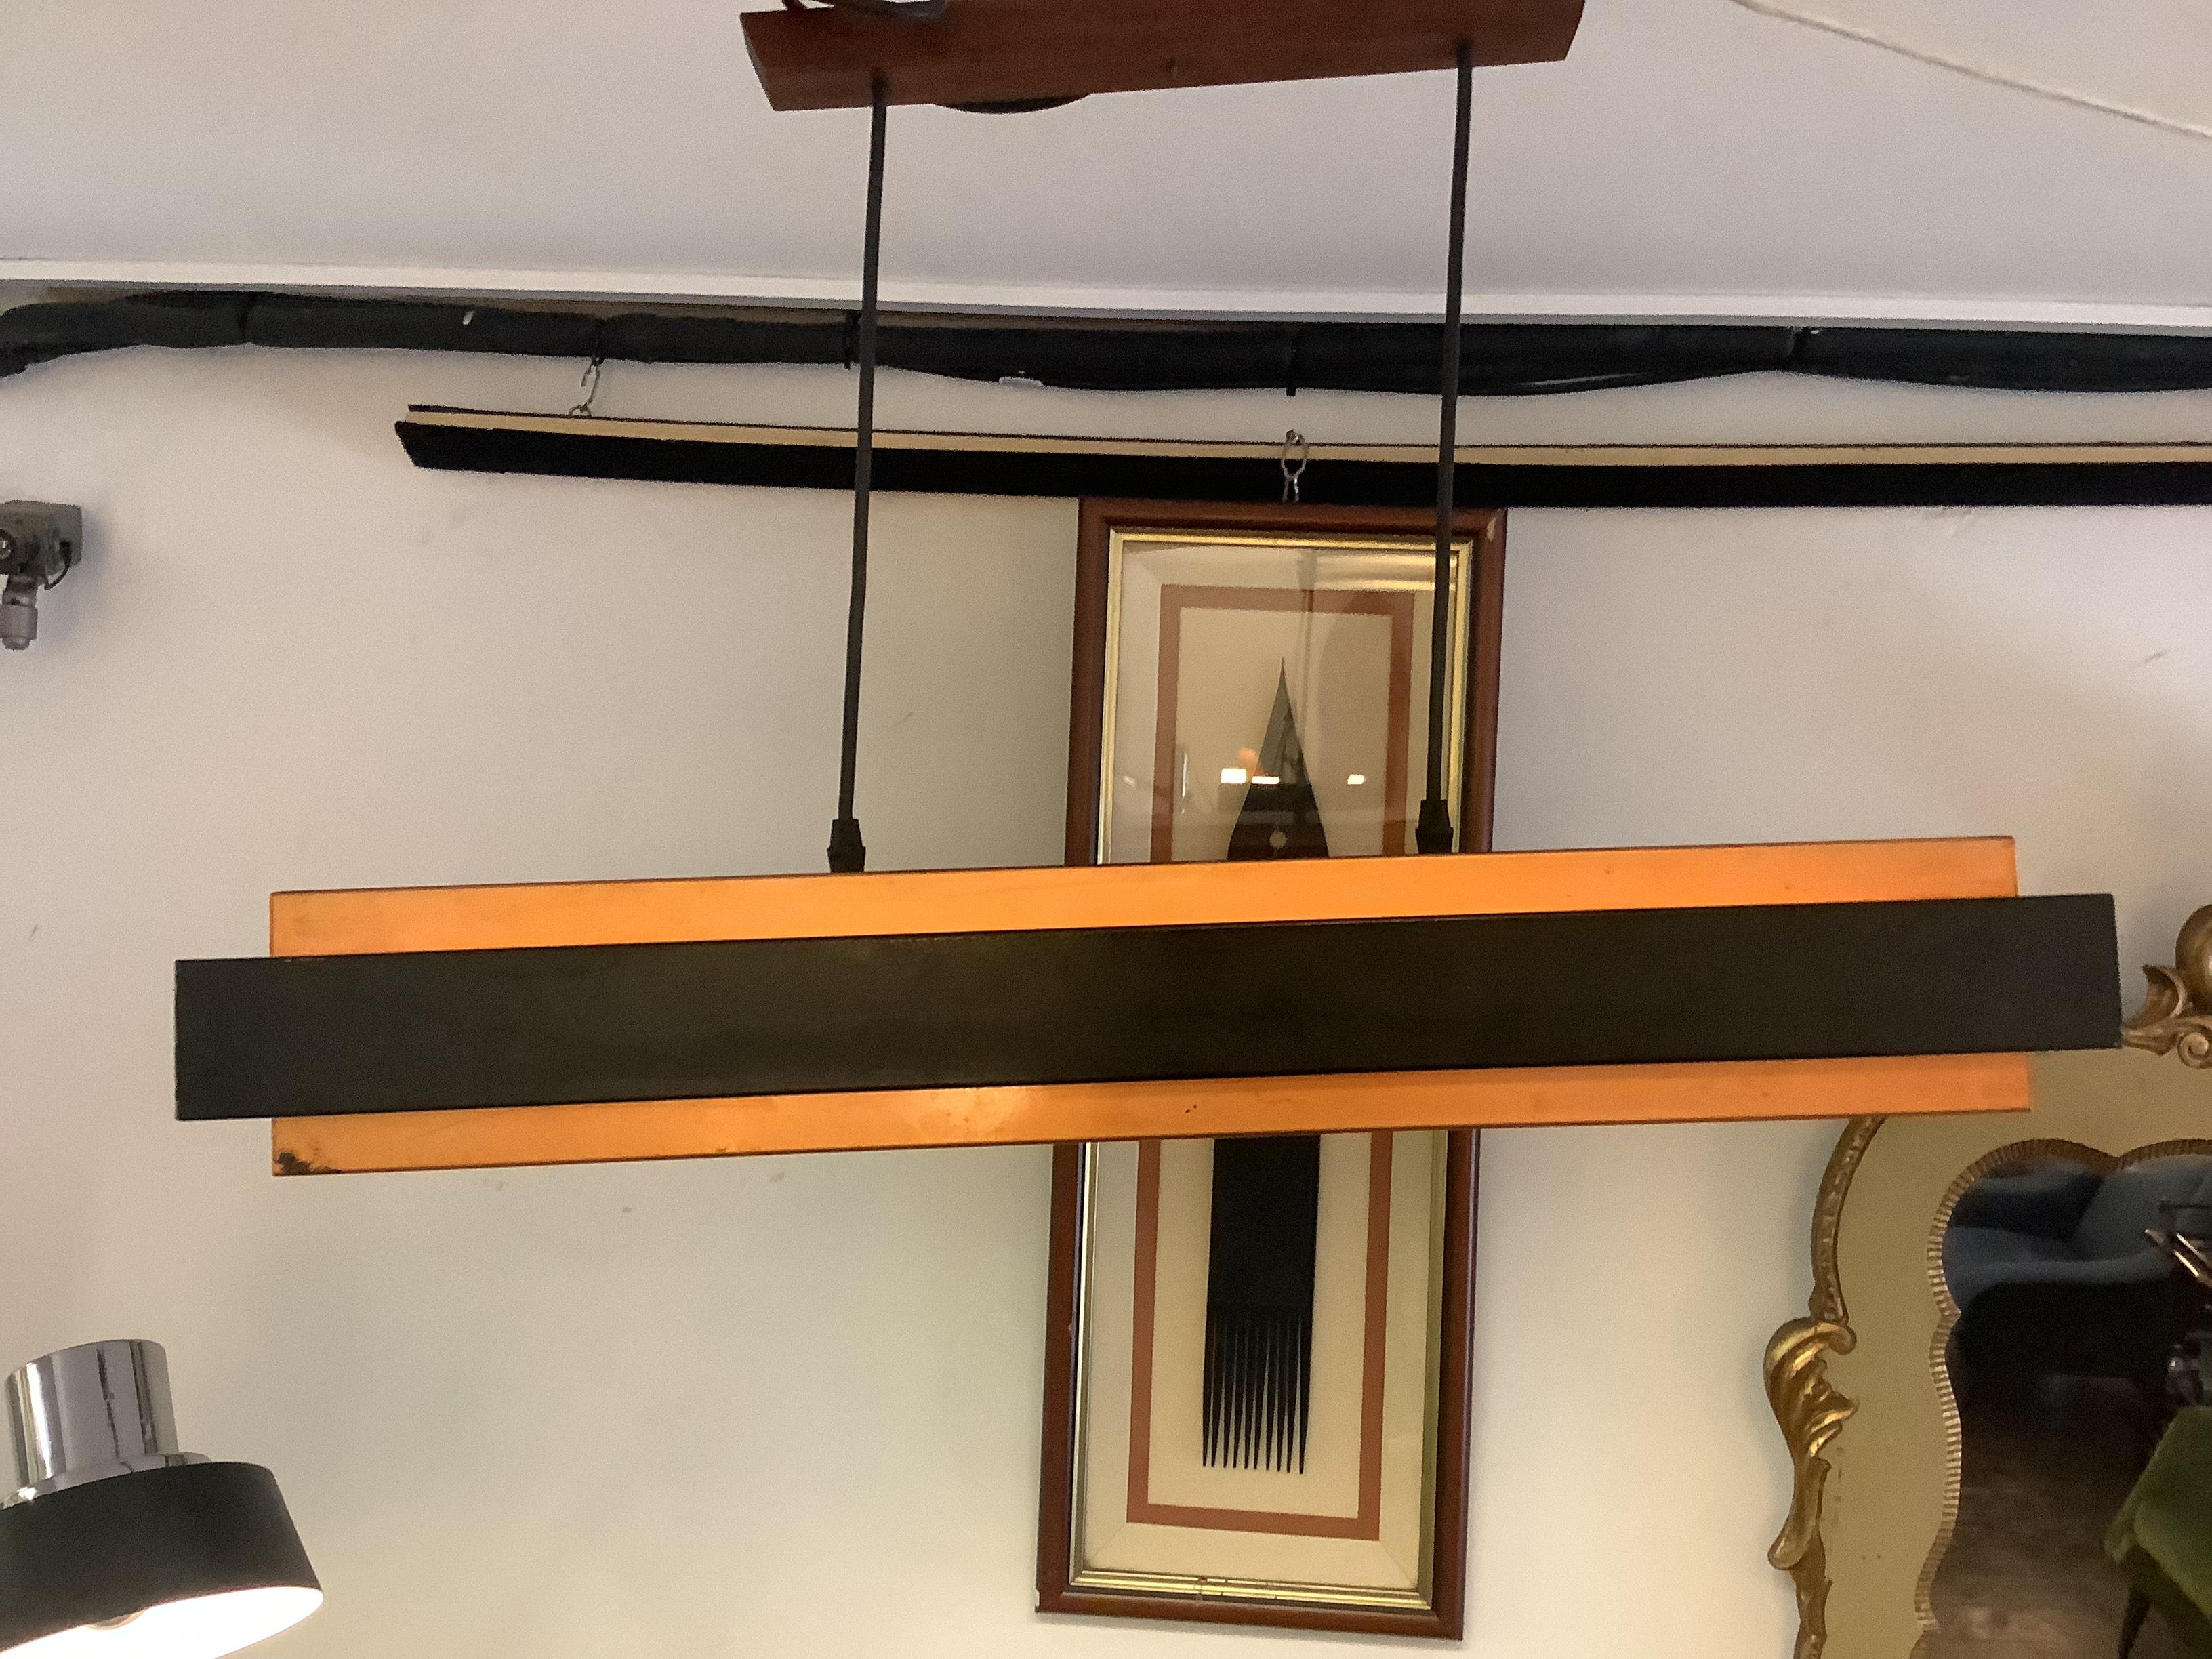 Aluminum and copper rectangle shape pendant lamp black band by Danish modern lighting manufacturing
 Company Fog & Morup was founded by Ansgar Fog and Erik Morup in Aarhus,Denmark in 1904.